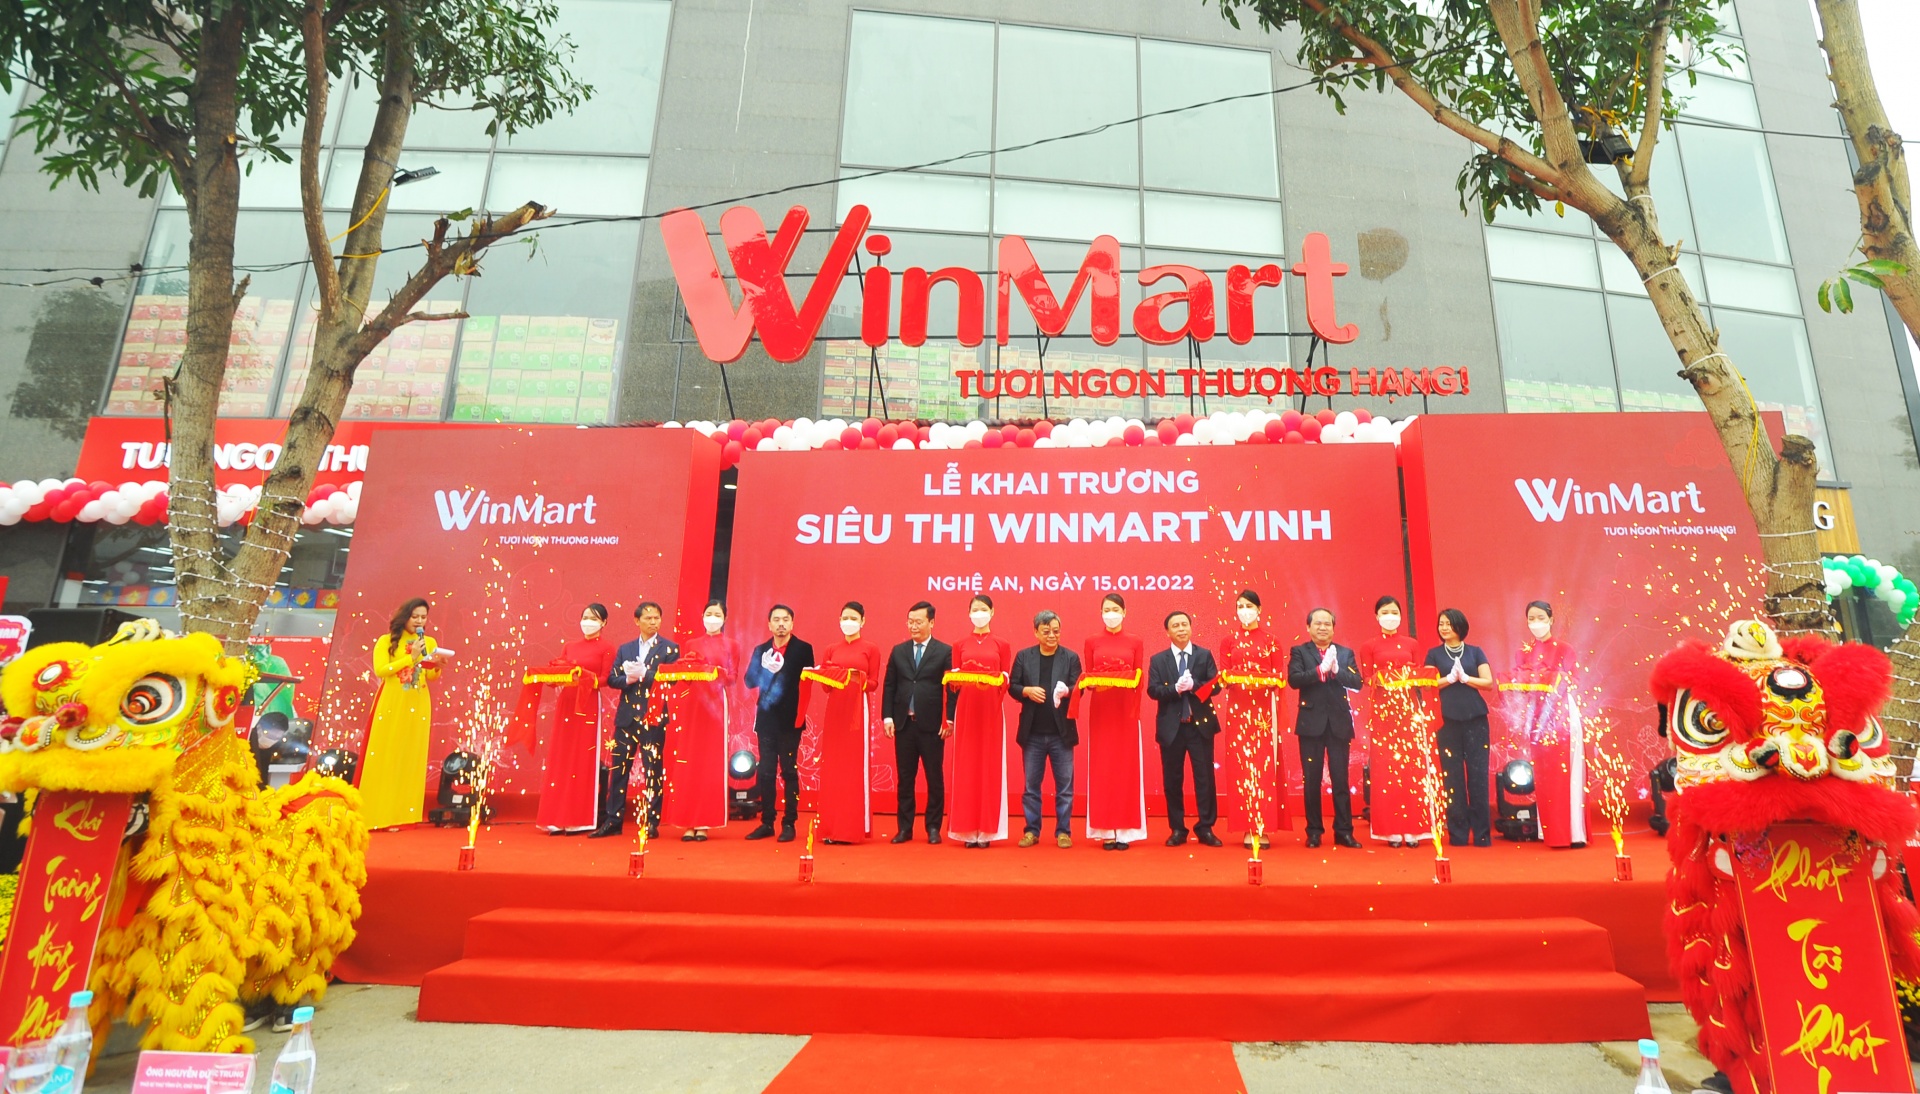 WinCommerce introduces WinMart with new name and strategy